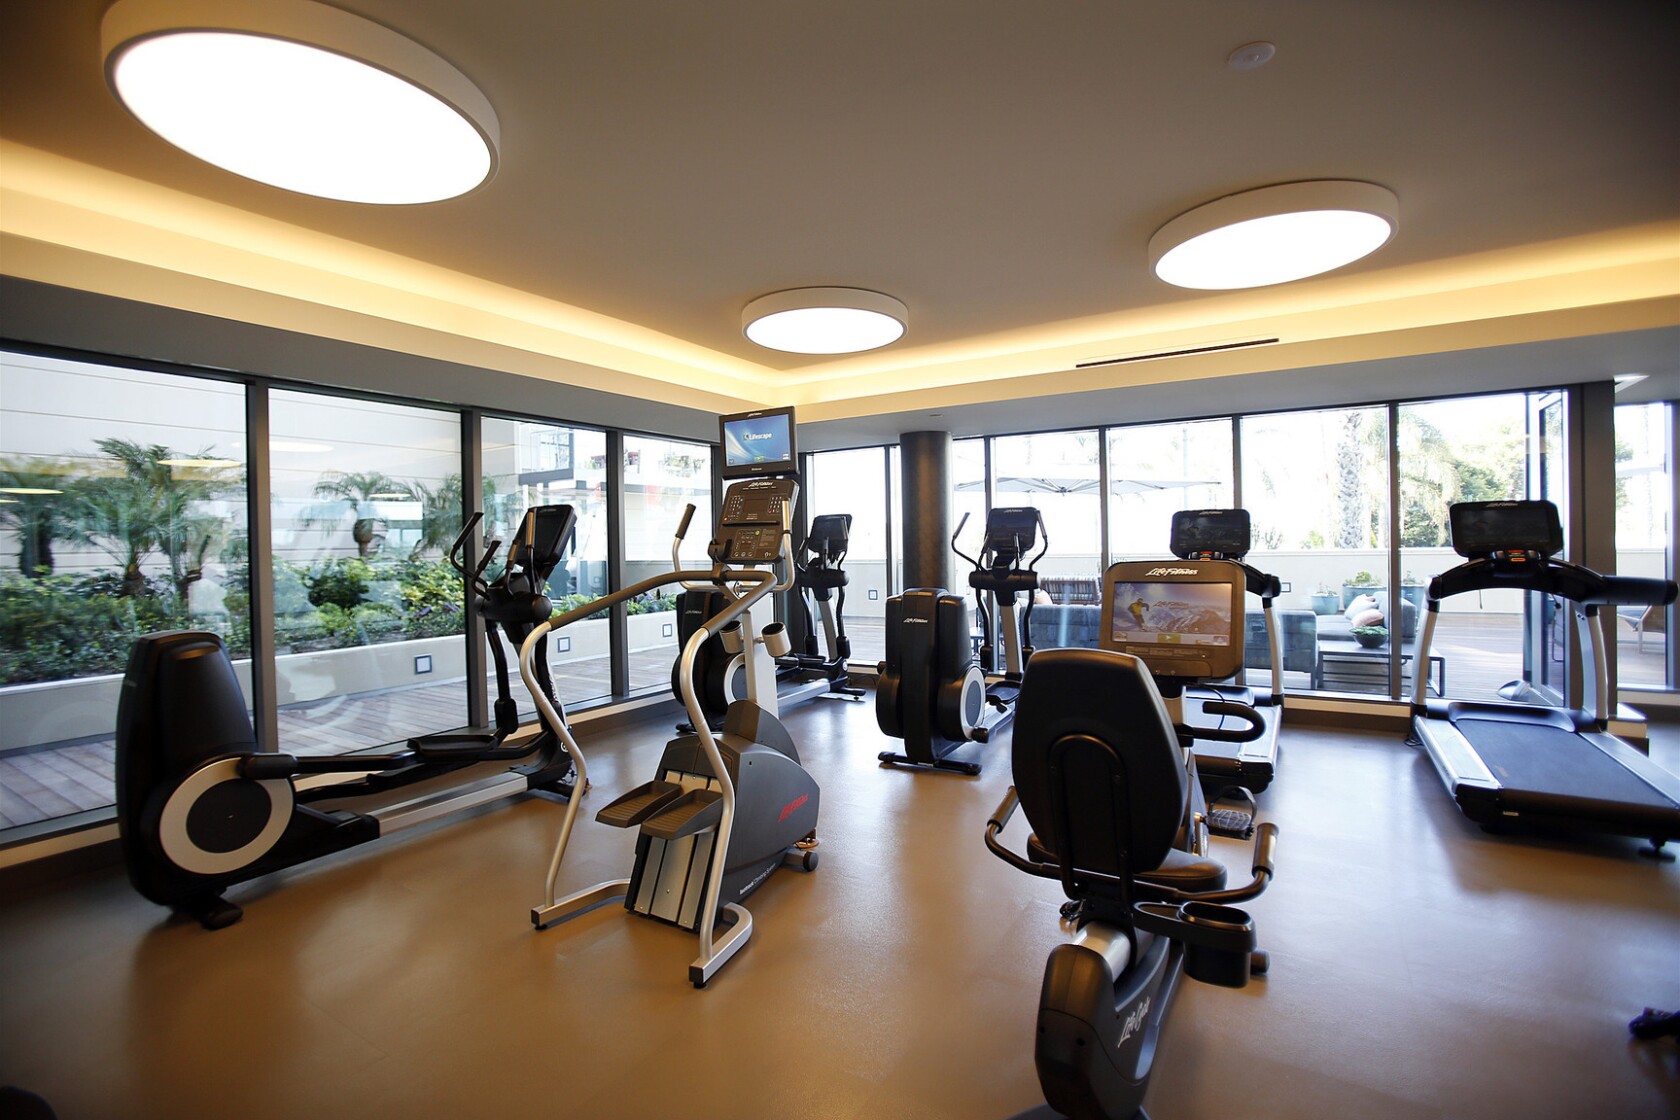 Los Angeles Residential Developments Are Pumping Up Gym Amenities